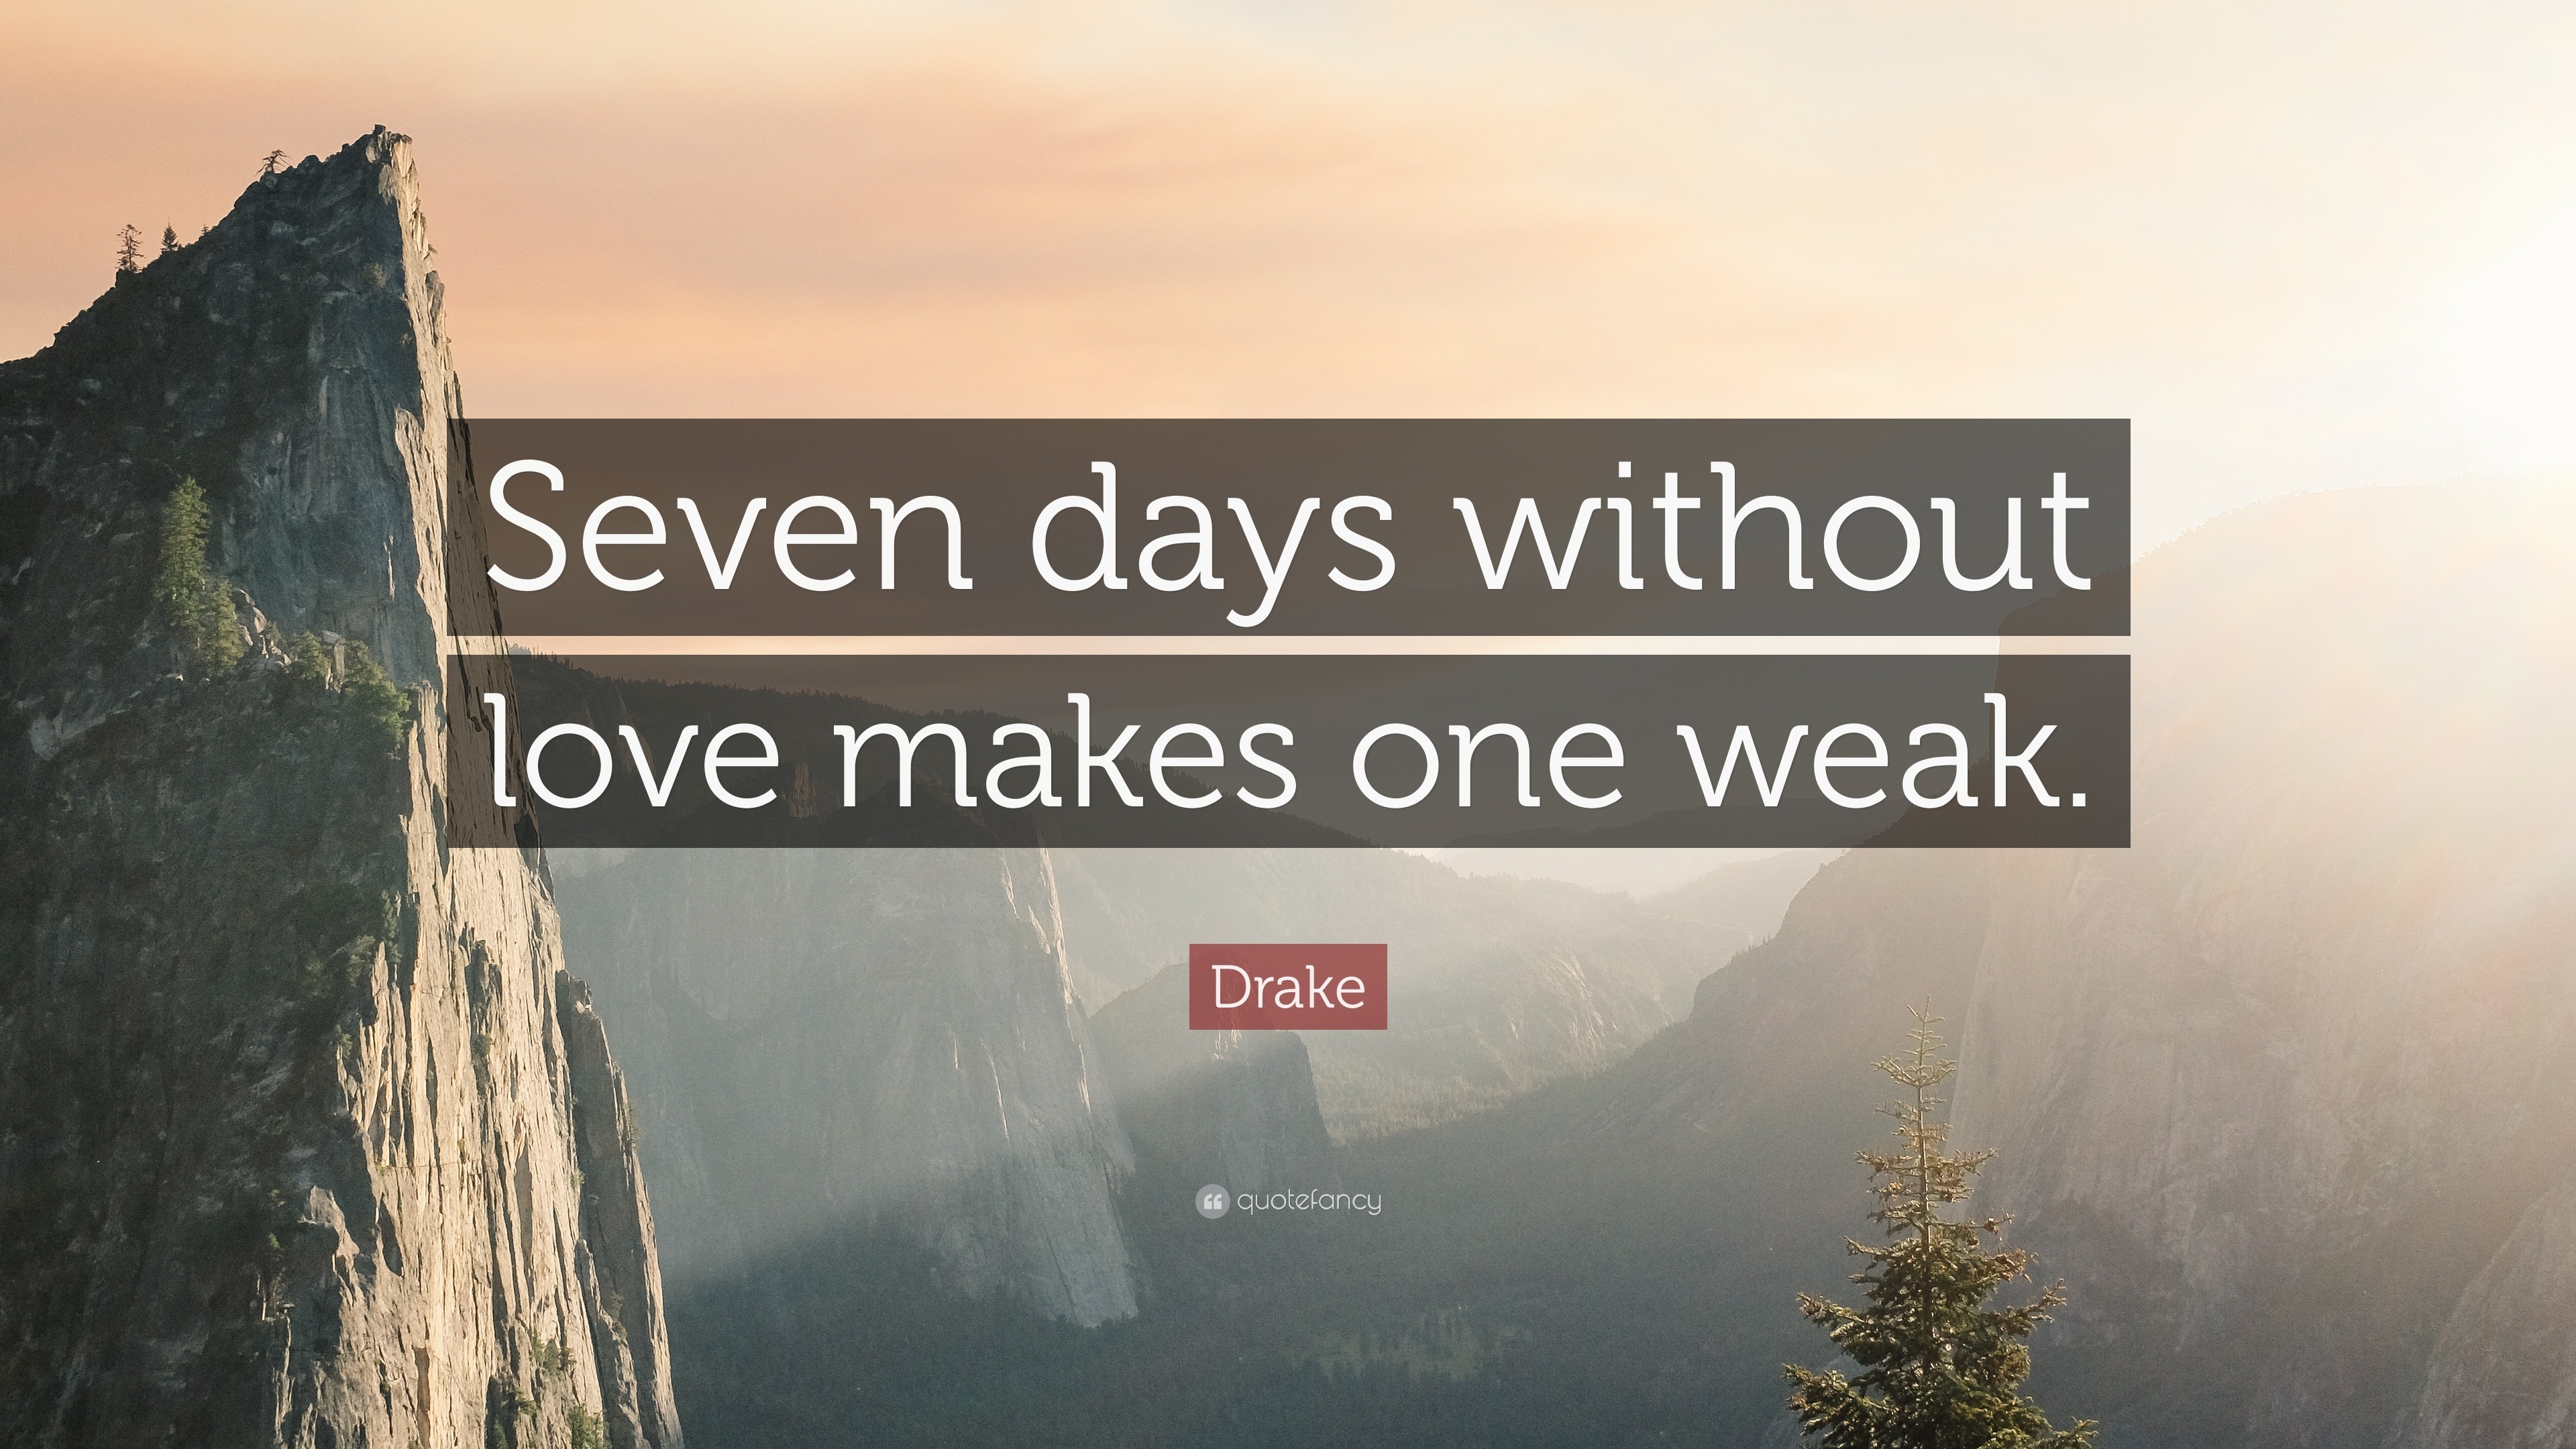 Drake Quote “Seven days without love makes one weak ”